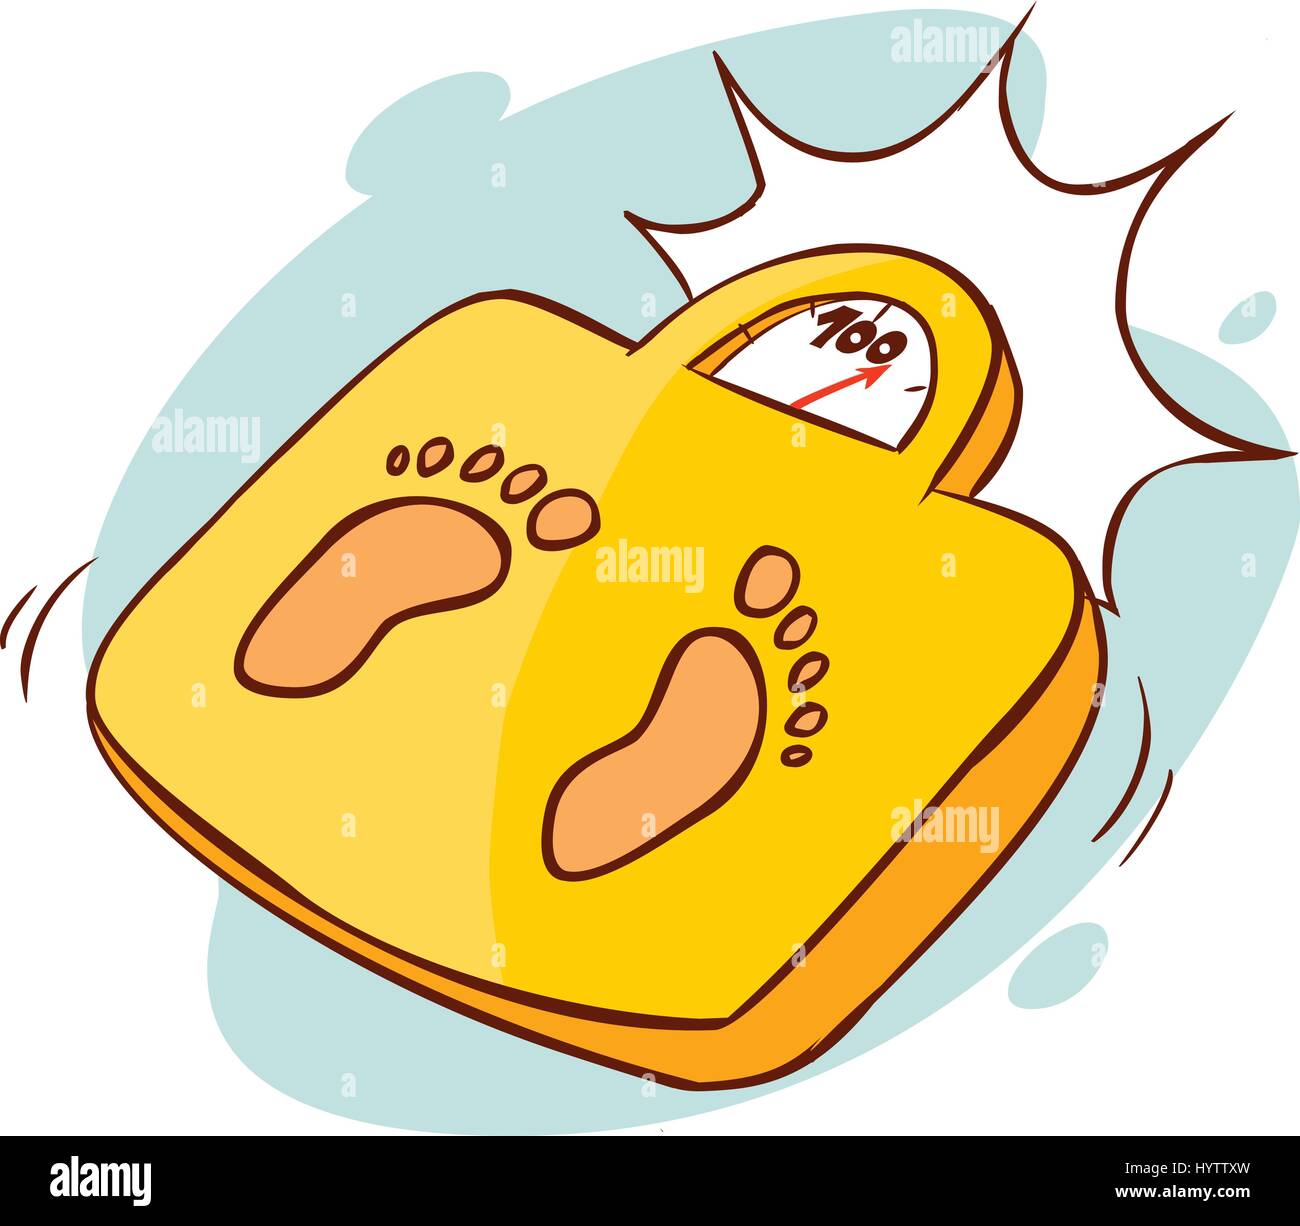 vector illustration of a Scales for weighing. Stock Vector